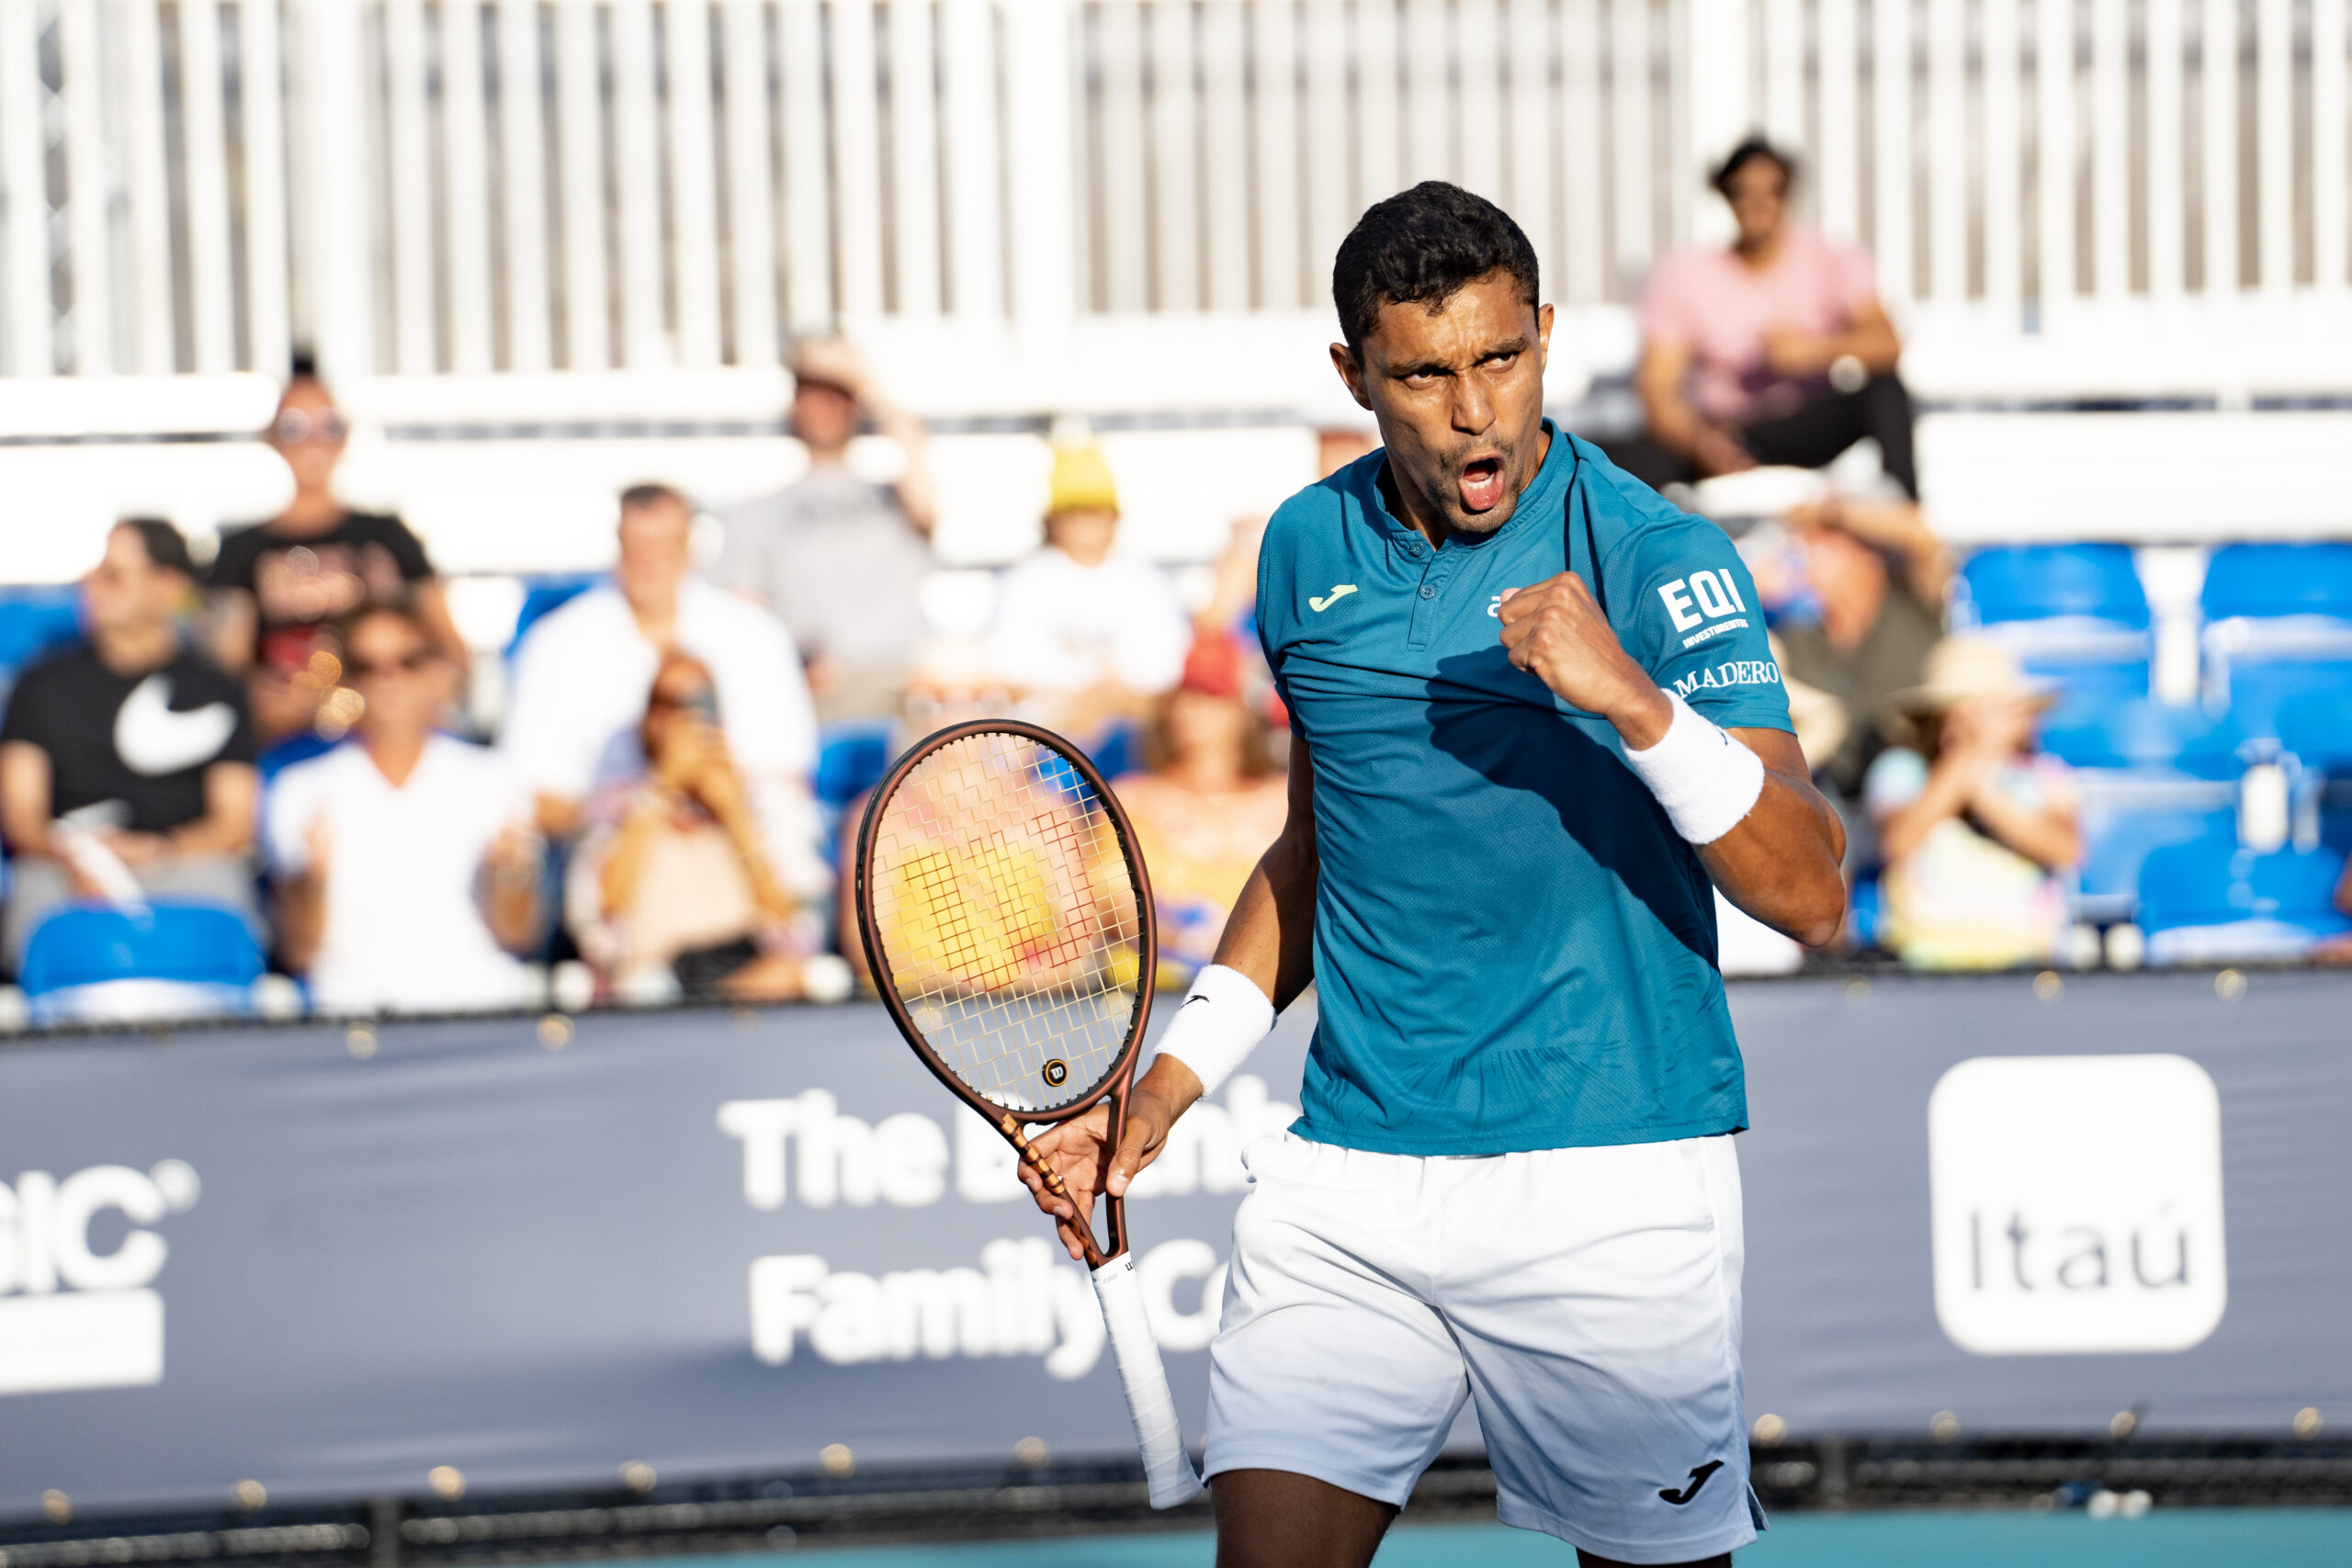 Thiago Monteiro with a fist pump during his match at the 2023 Miami Open